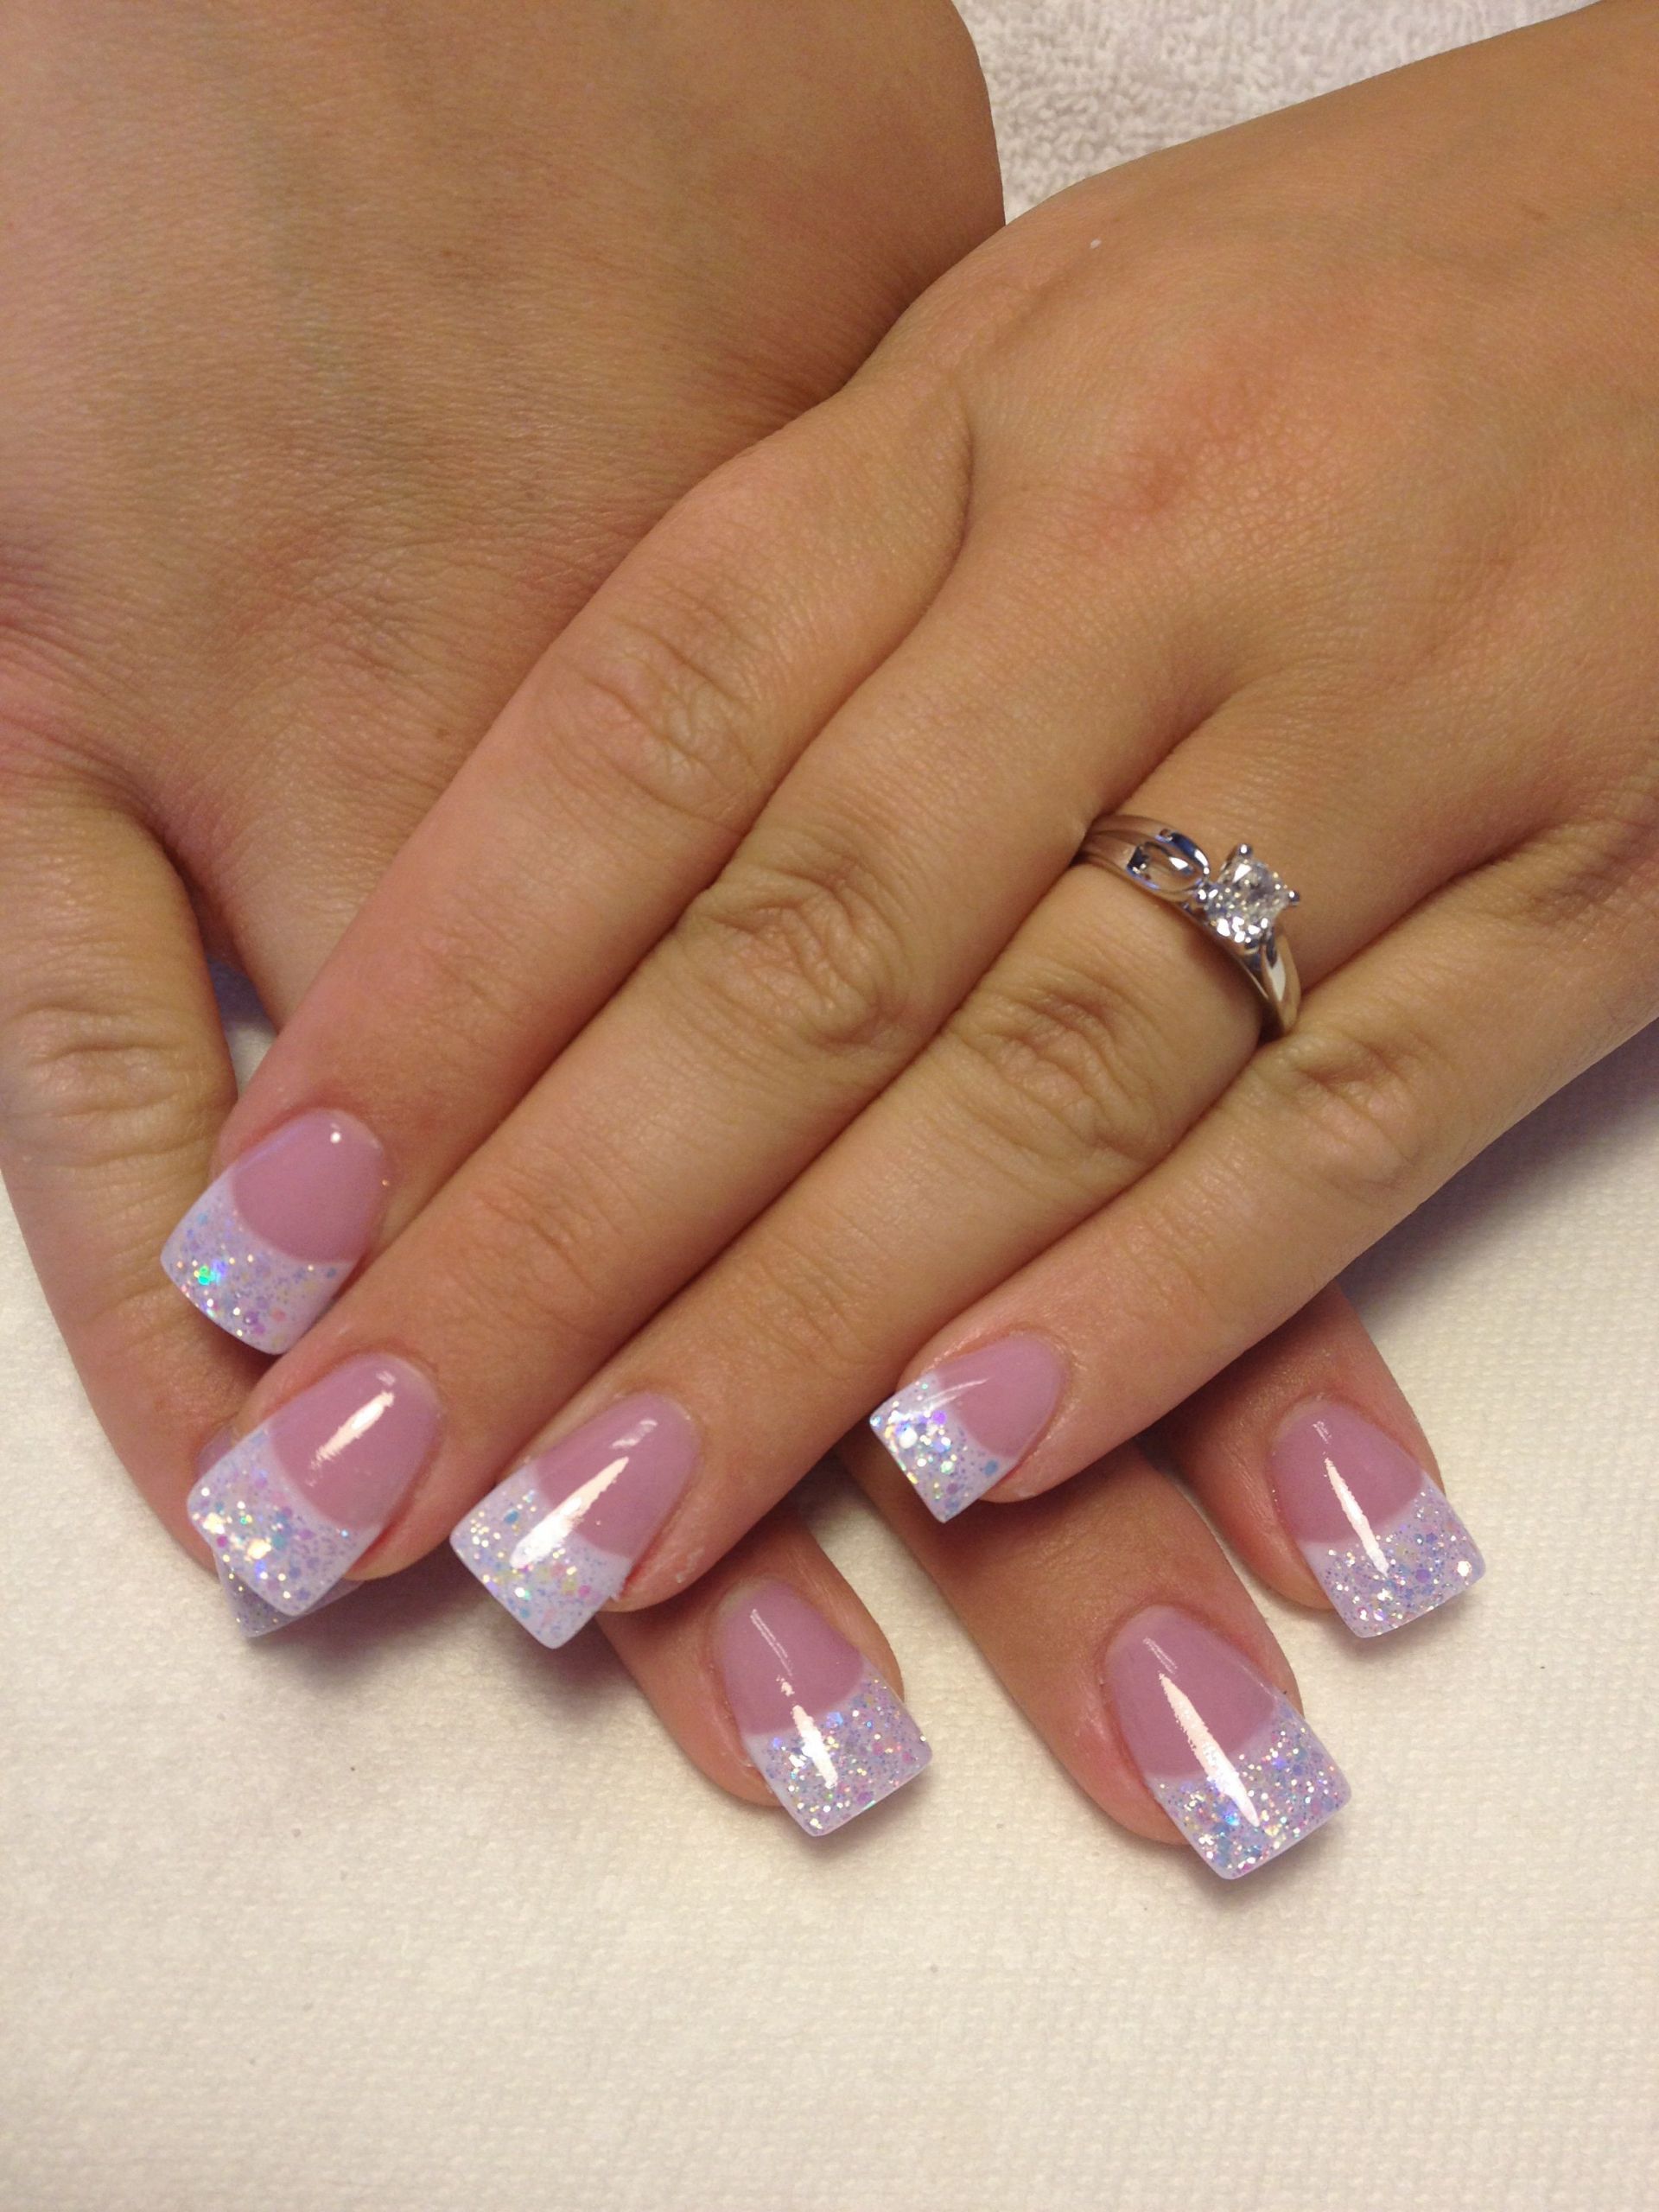 French Gel Nail Designs
 Sparkly pink and whites by Cathy Heine Curl Up and Dye